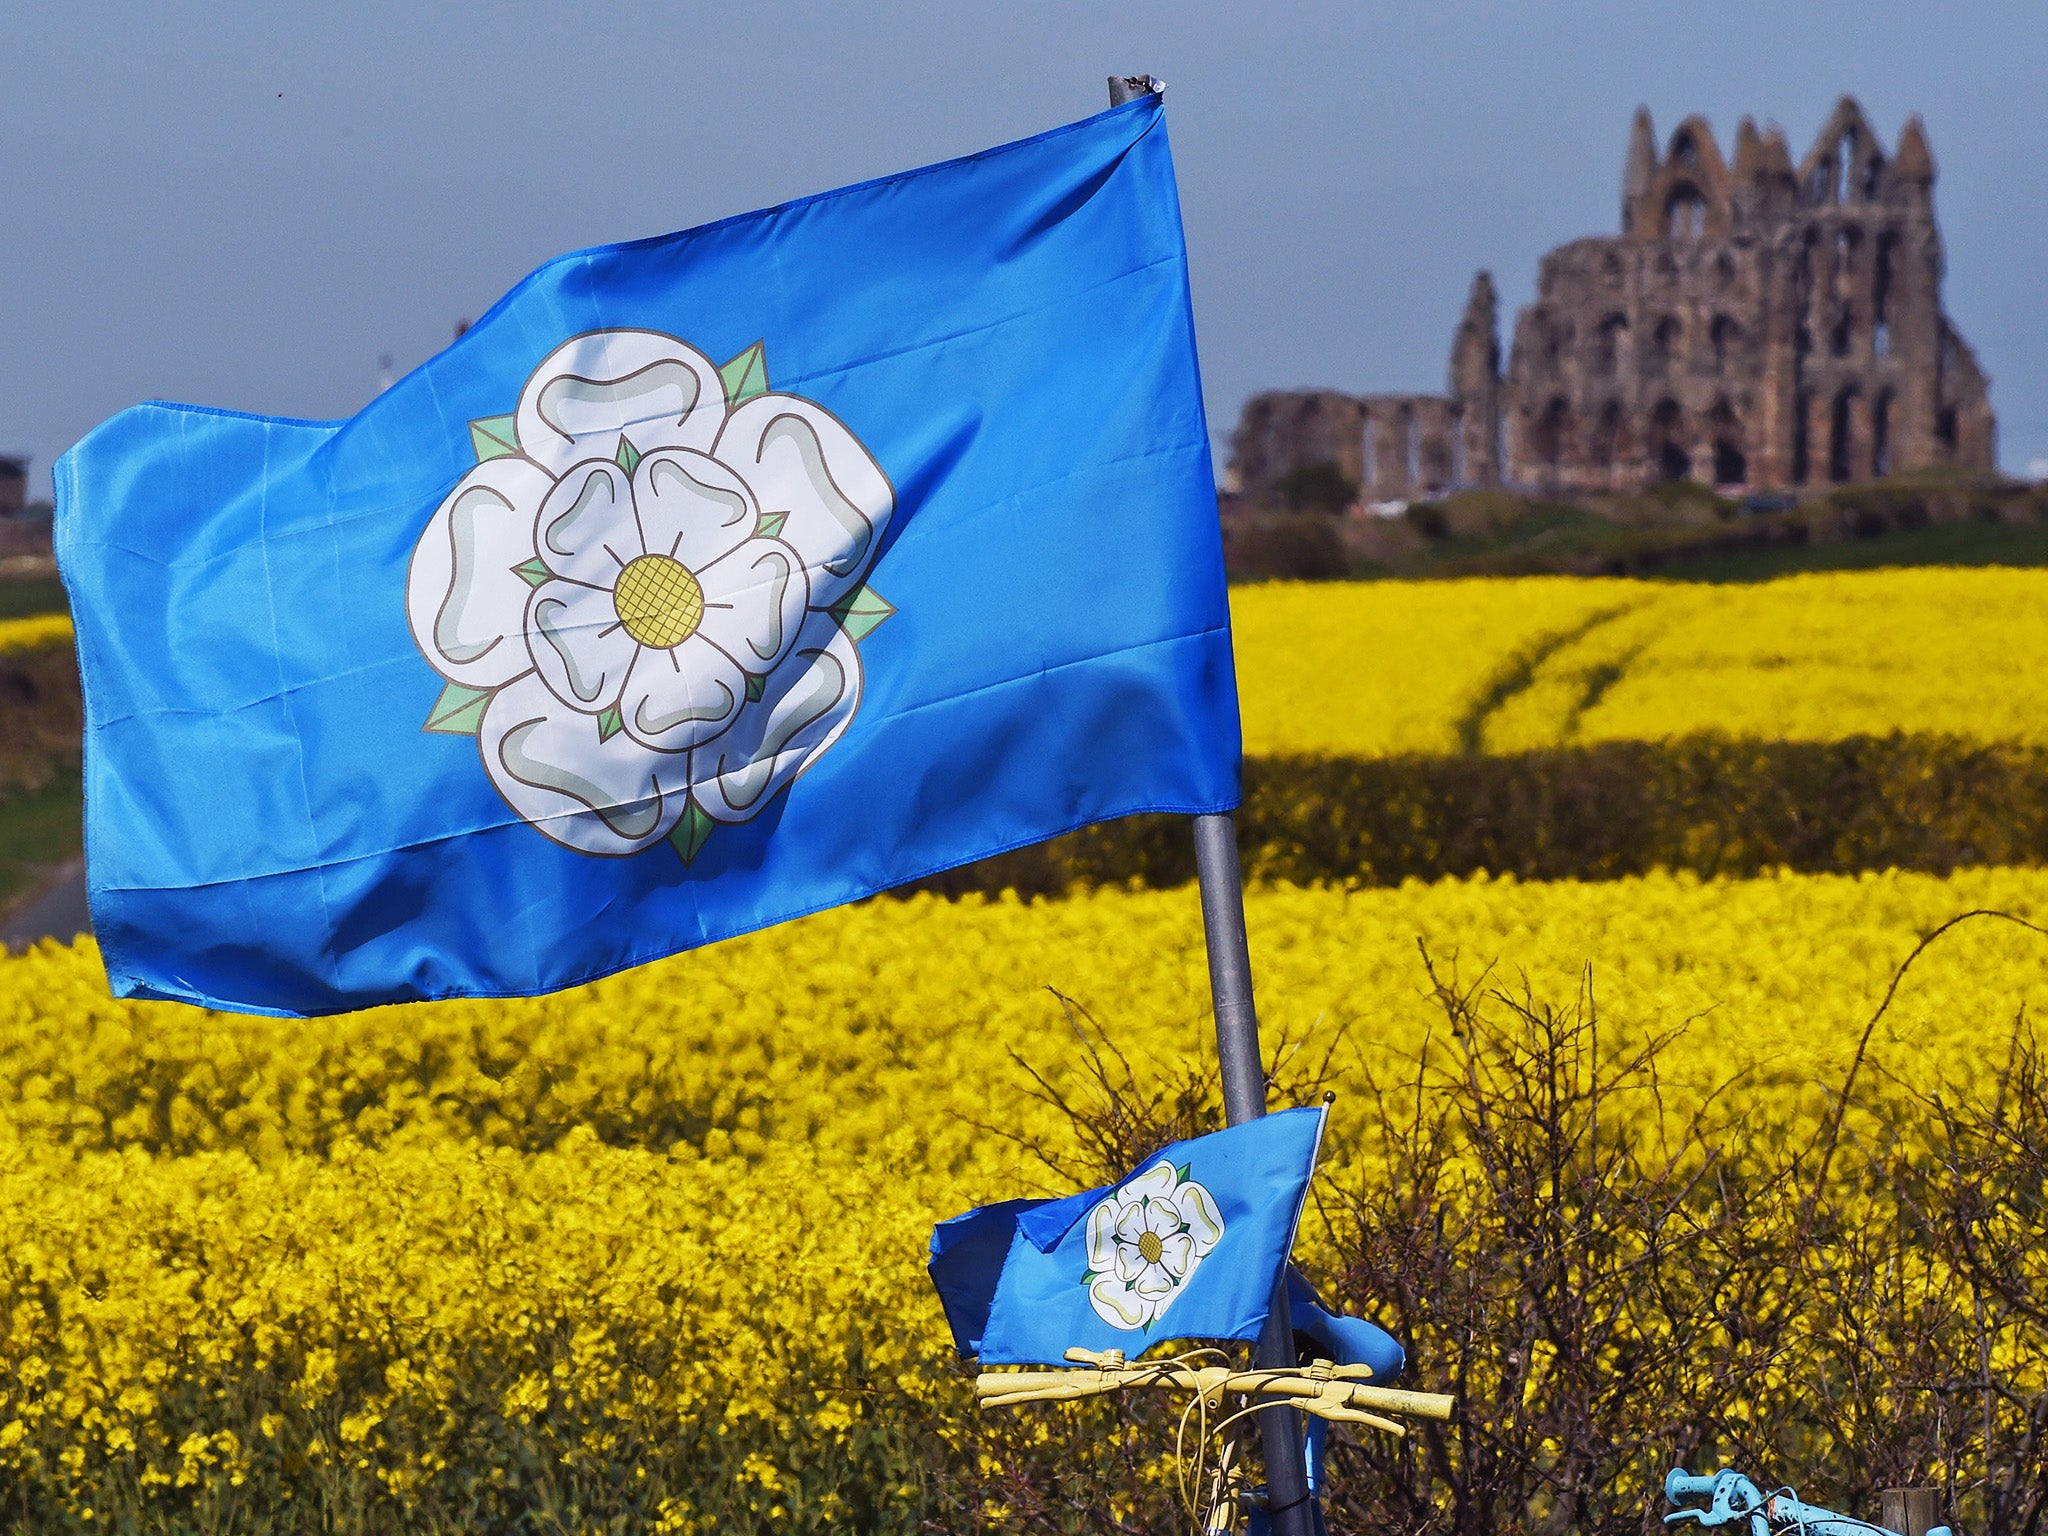 The White Rose of Yorkshire: seen near Whitby Abbey along the route for the Tour de Yorkshire